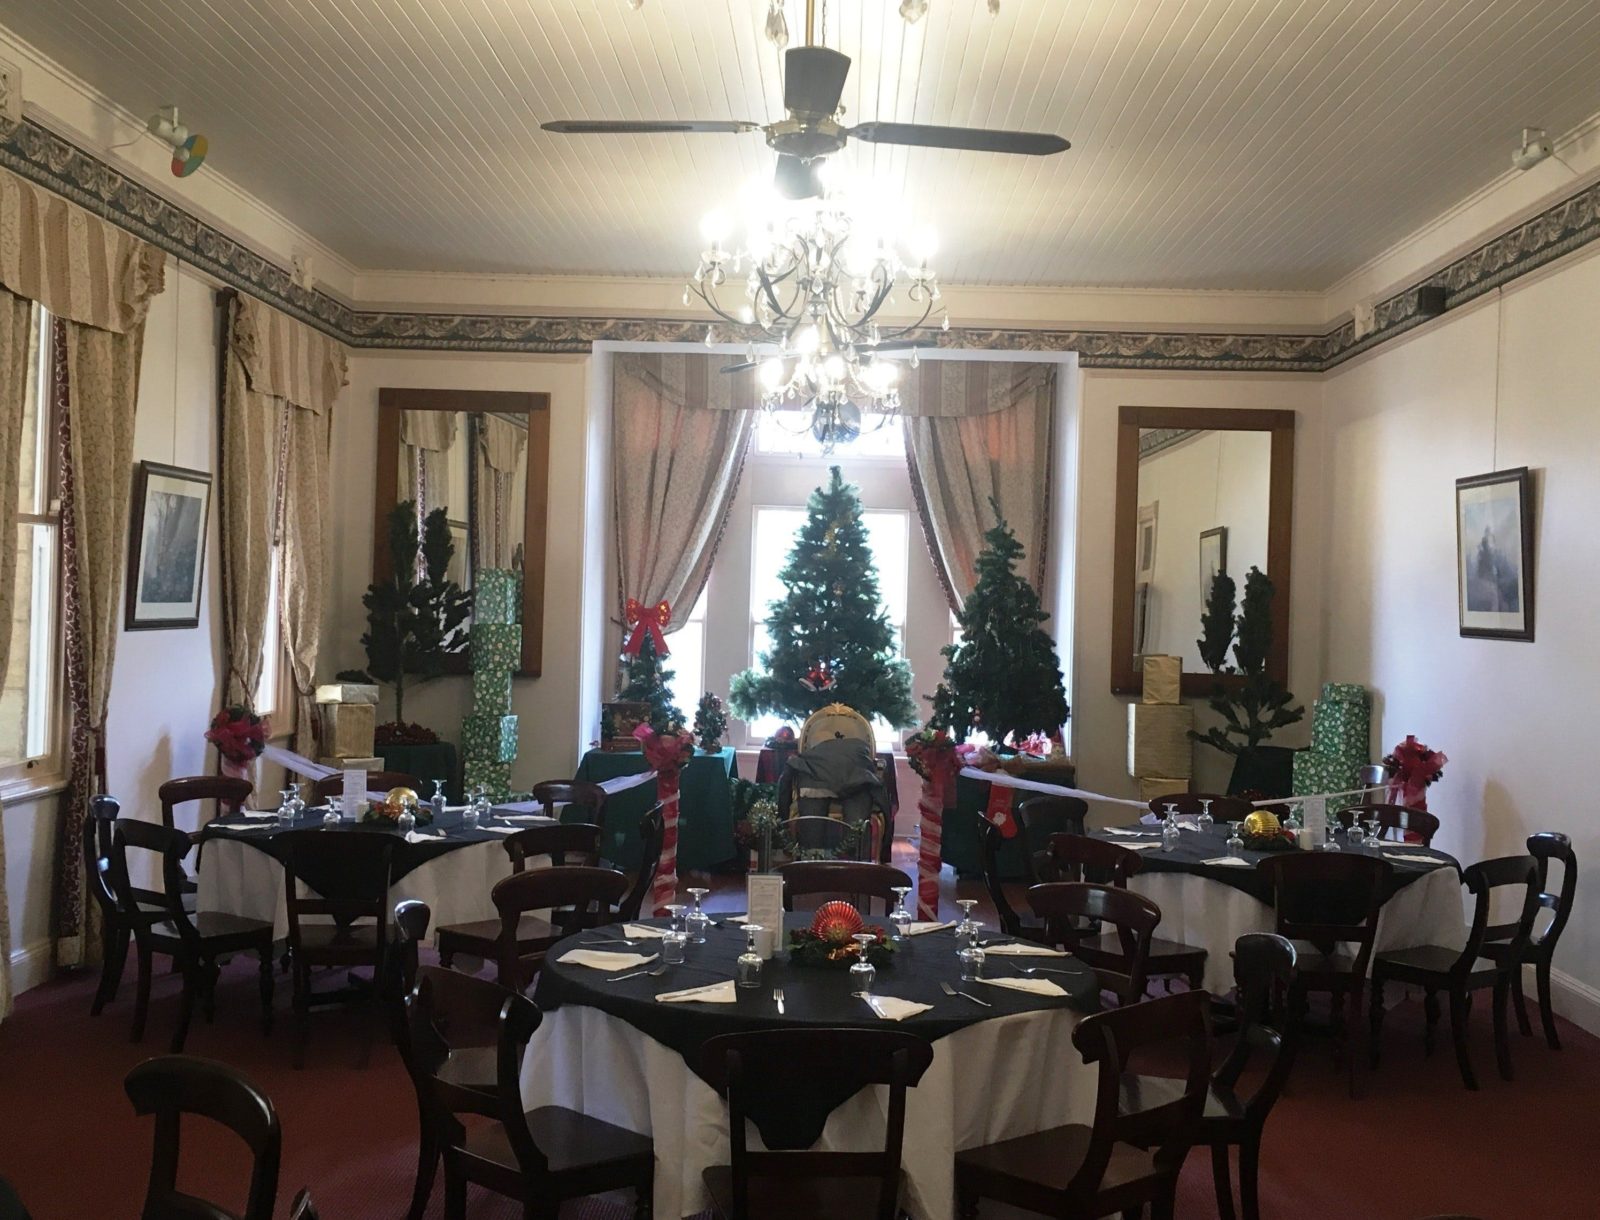 Abbey manor hotel Warwick QLD, Christmas in July Dinner